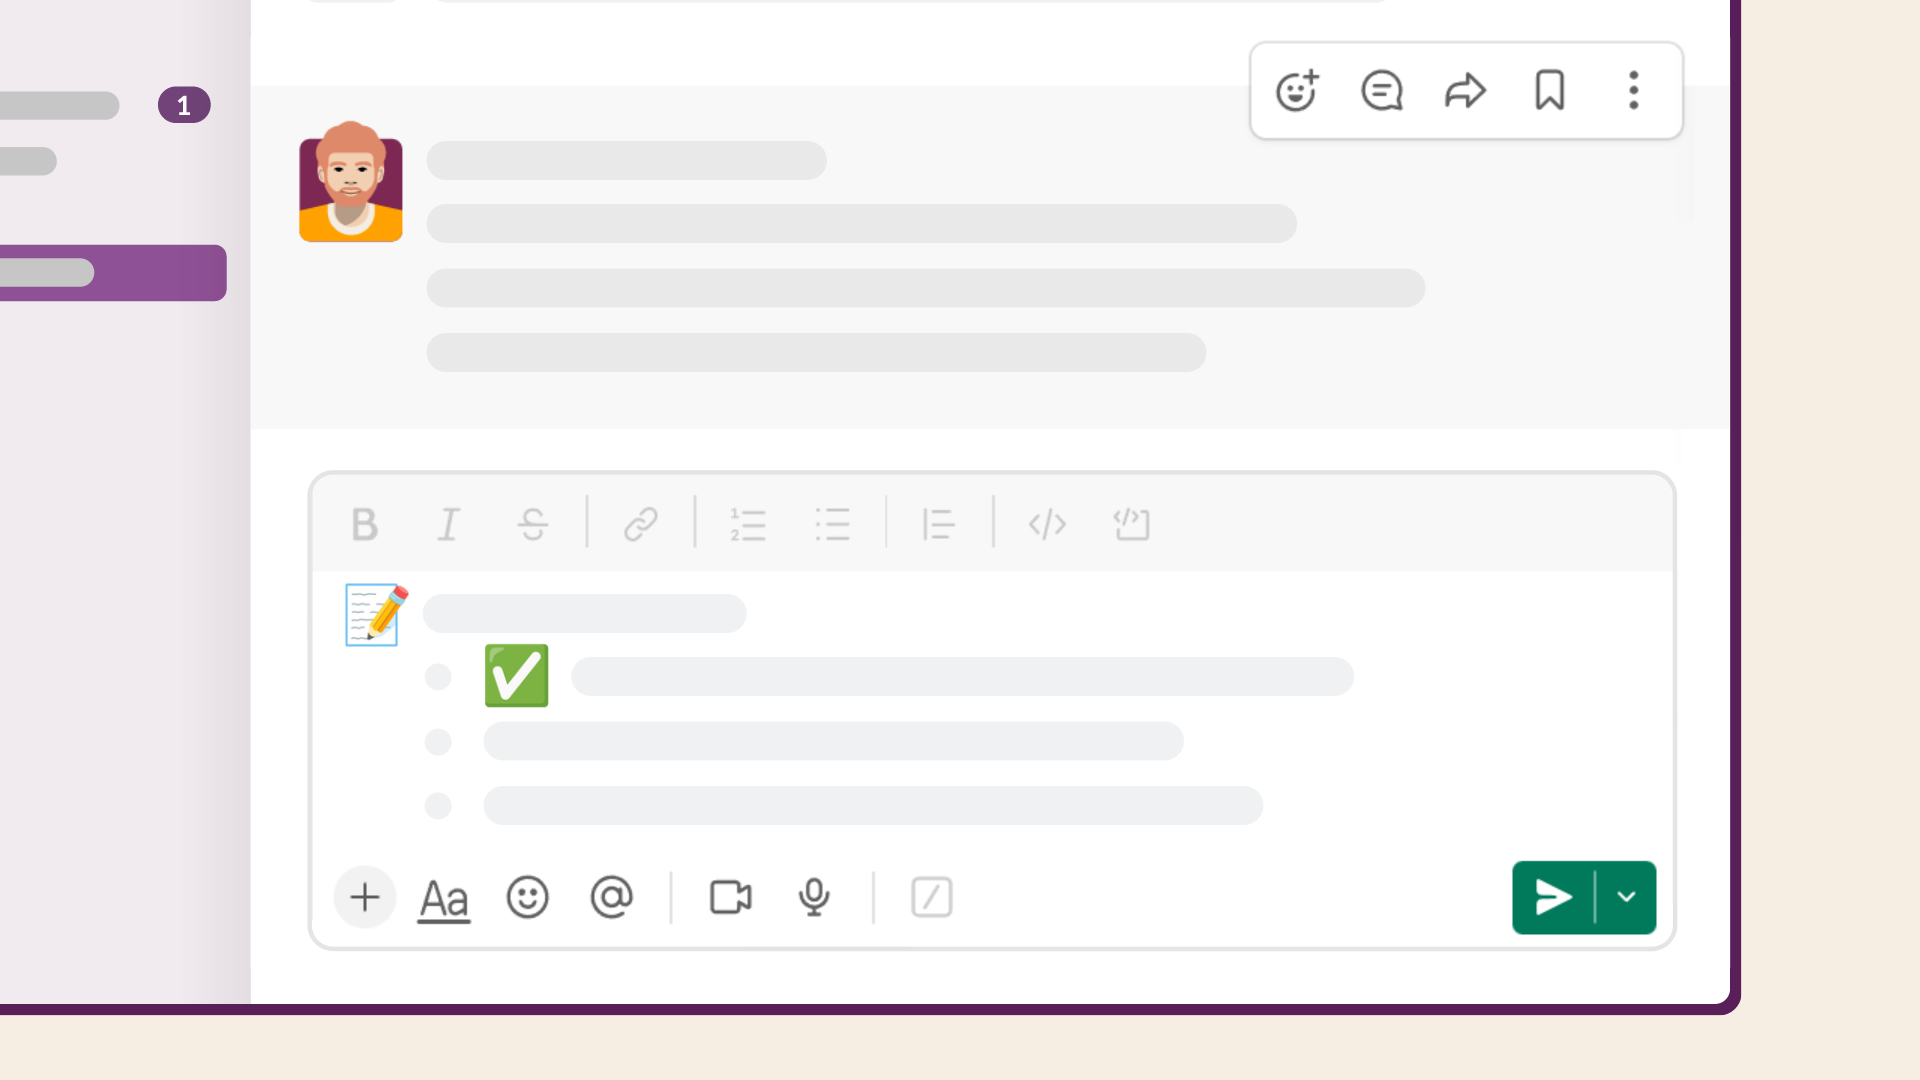 View of the message field in Slack